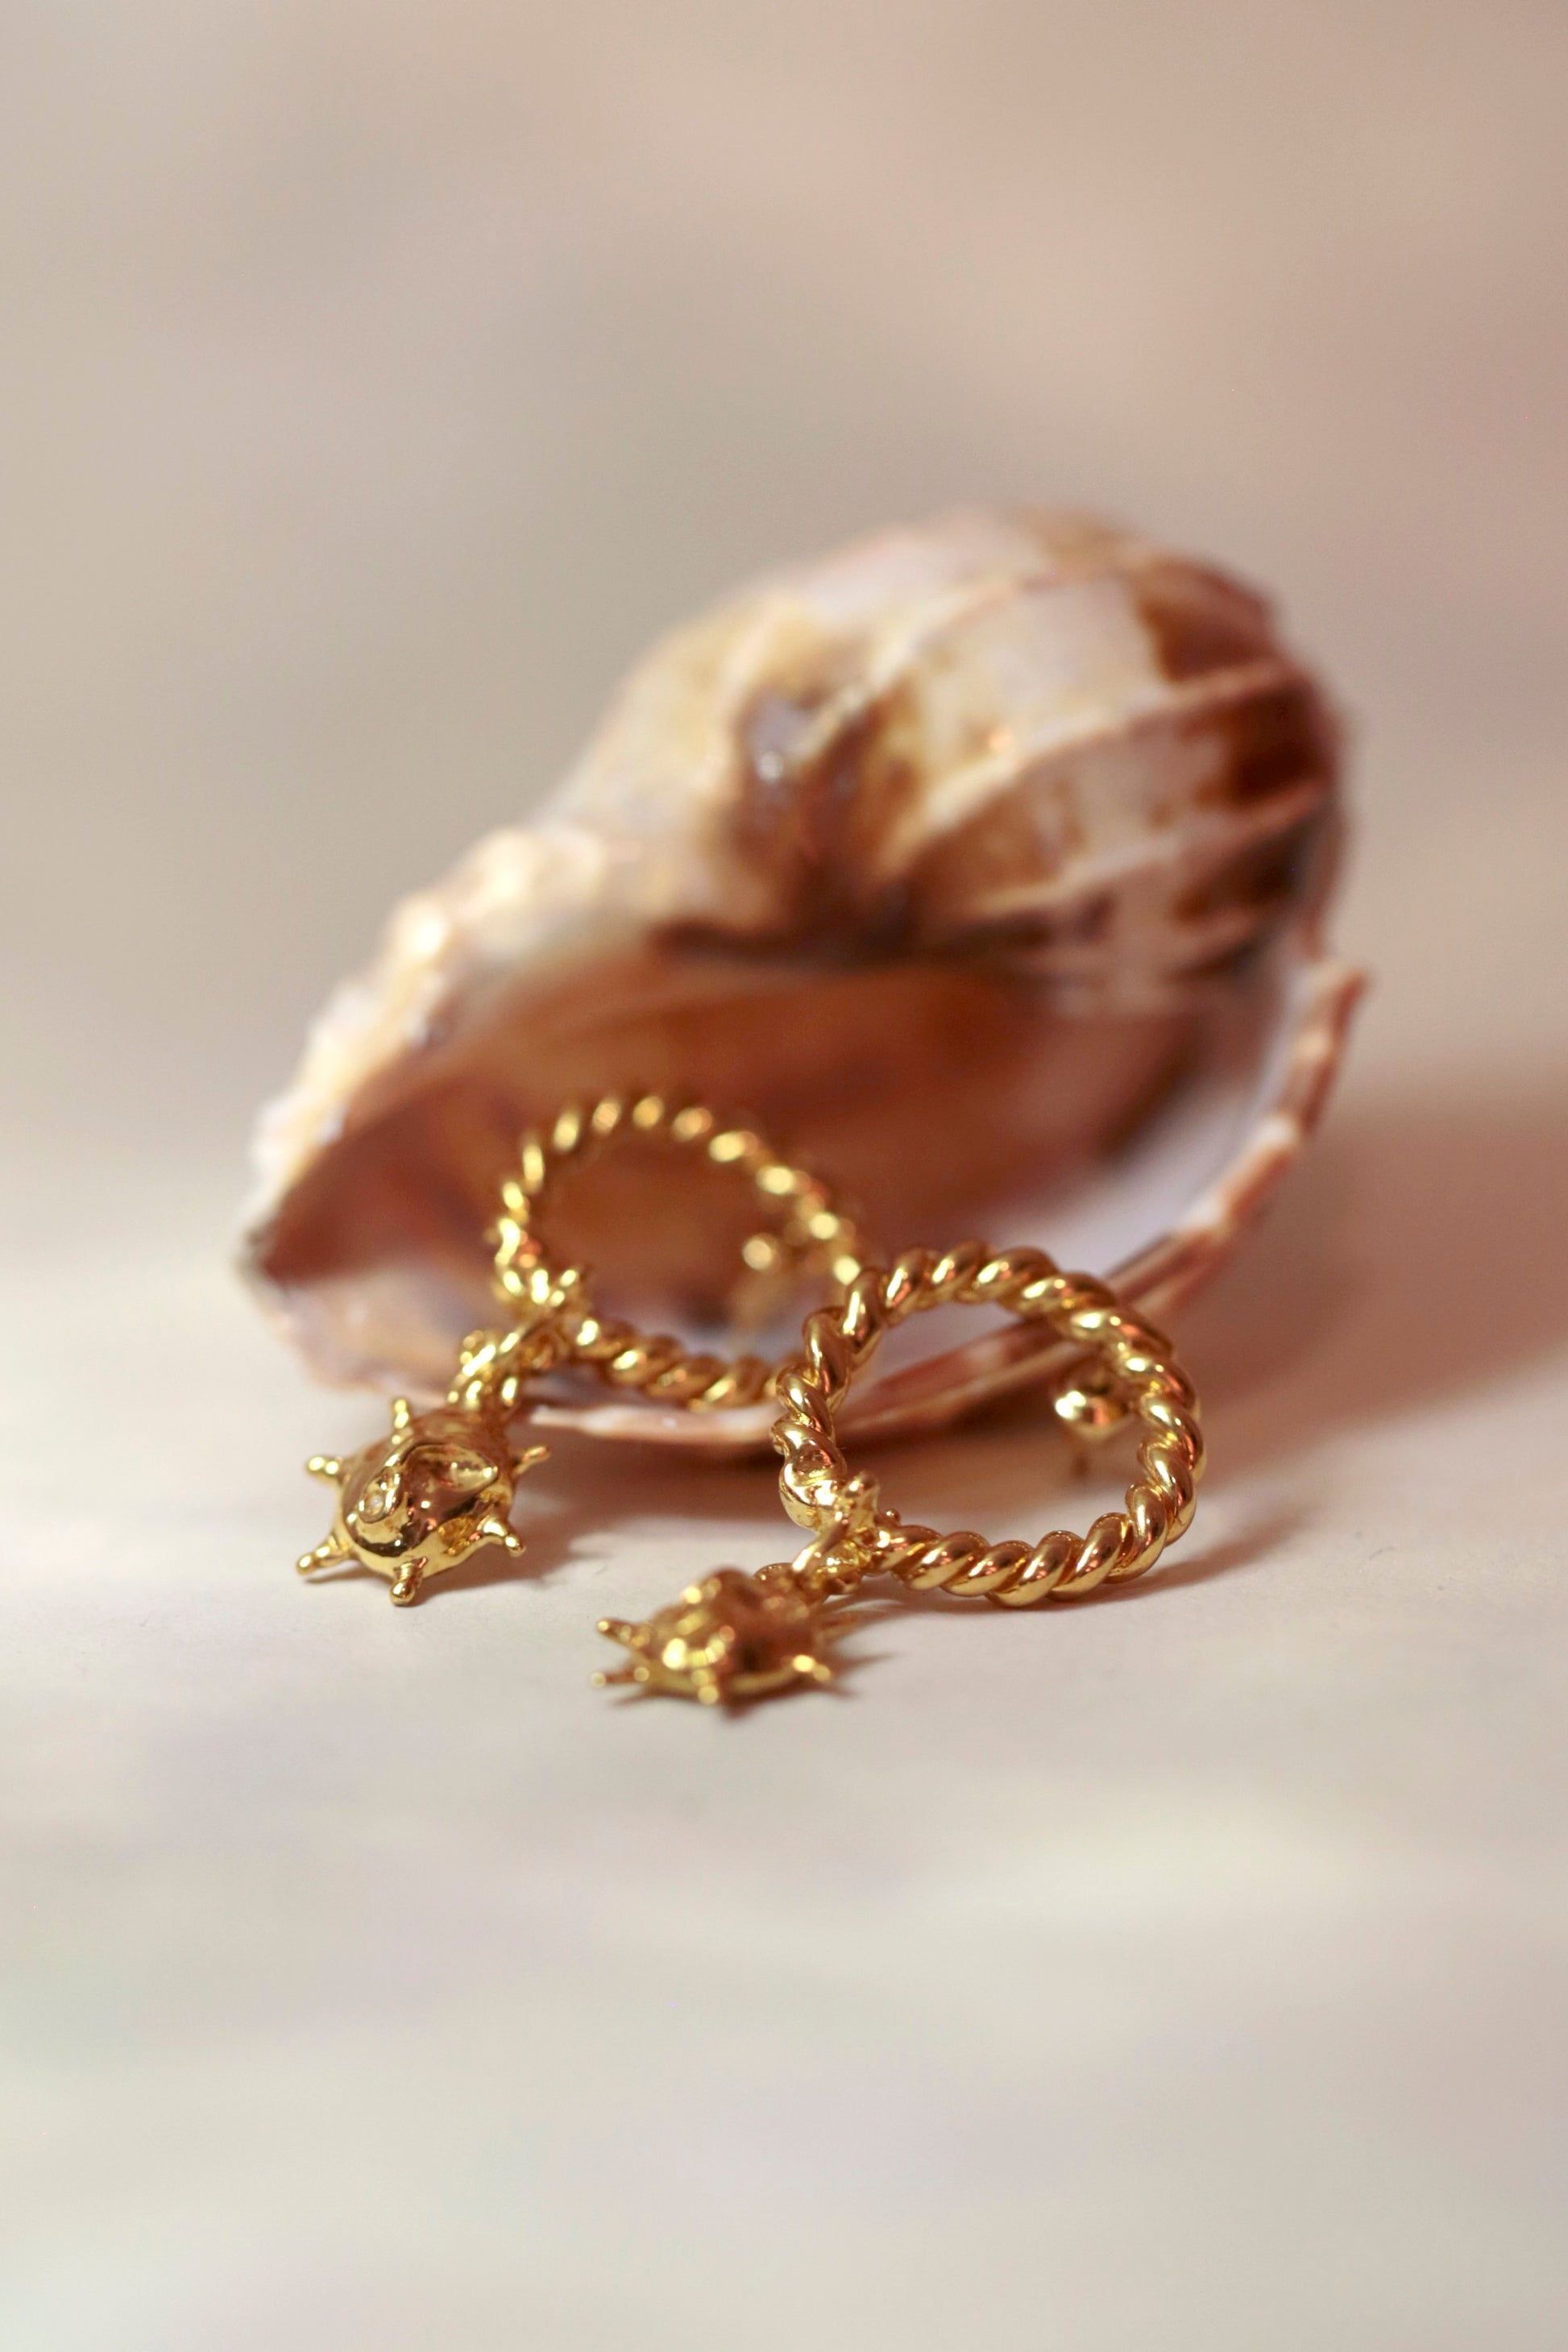 Ouroboros Sun Drop Earring by CLARK photographed in front of shell in dappled underwater light. These earrings feature a twisted loop with a small sun-faced charm. Symbolic of rebirth and hand made in 18K Gold Vermeil - a brilliant gift to complete any collection.